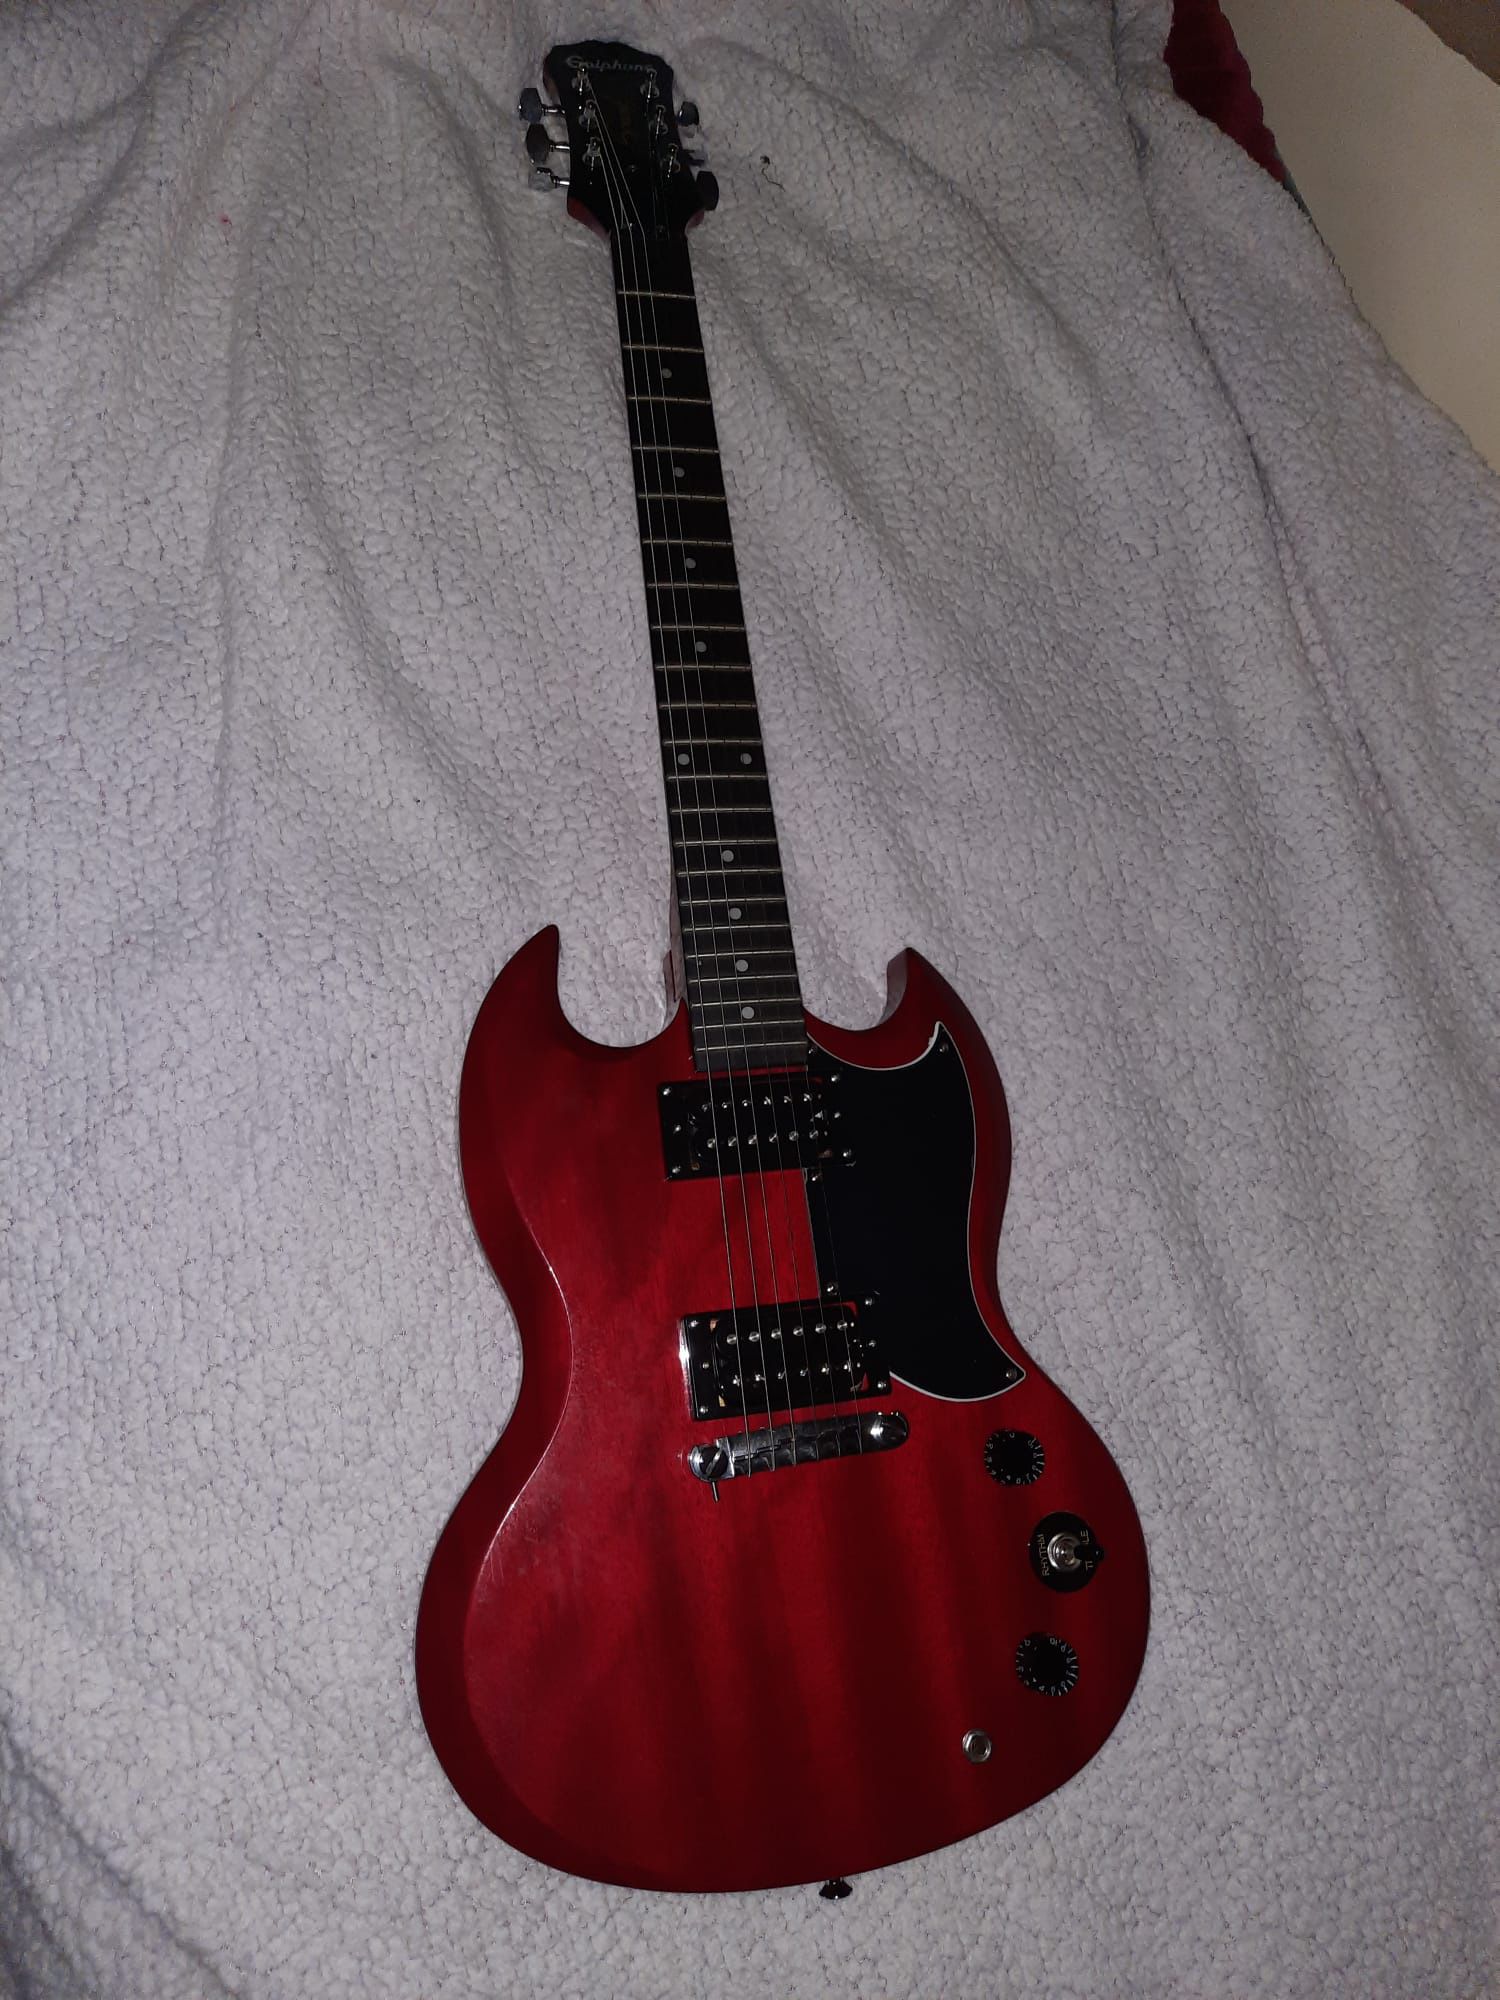 Epiphone Limited Edition SG Special-I Electric Guitar-Cherry